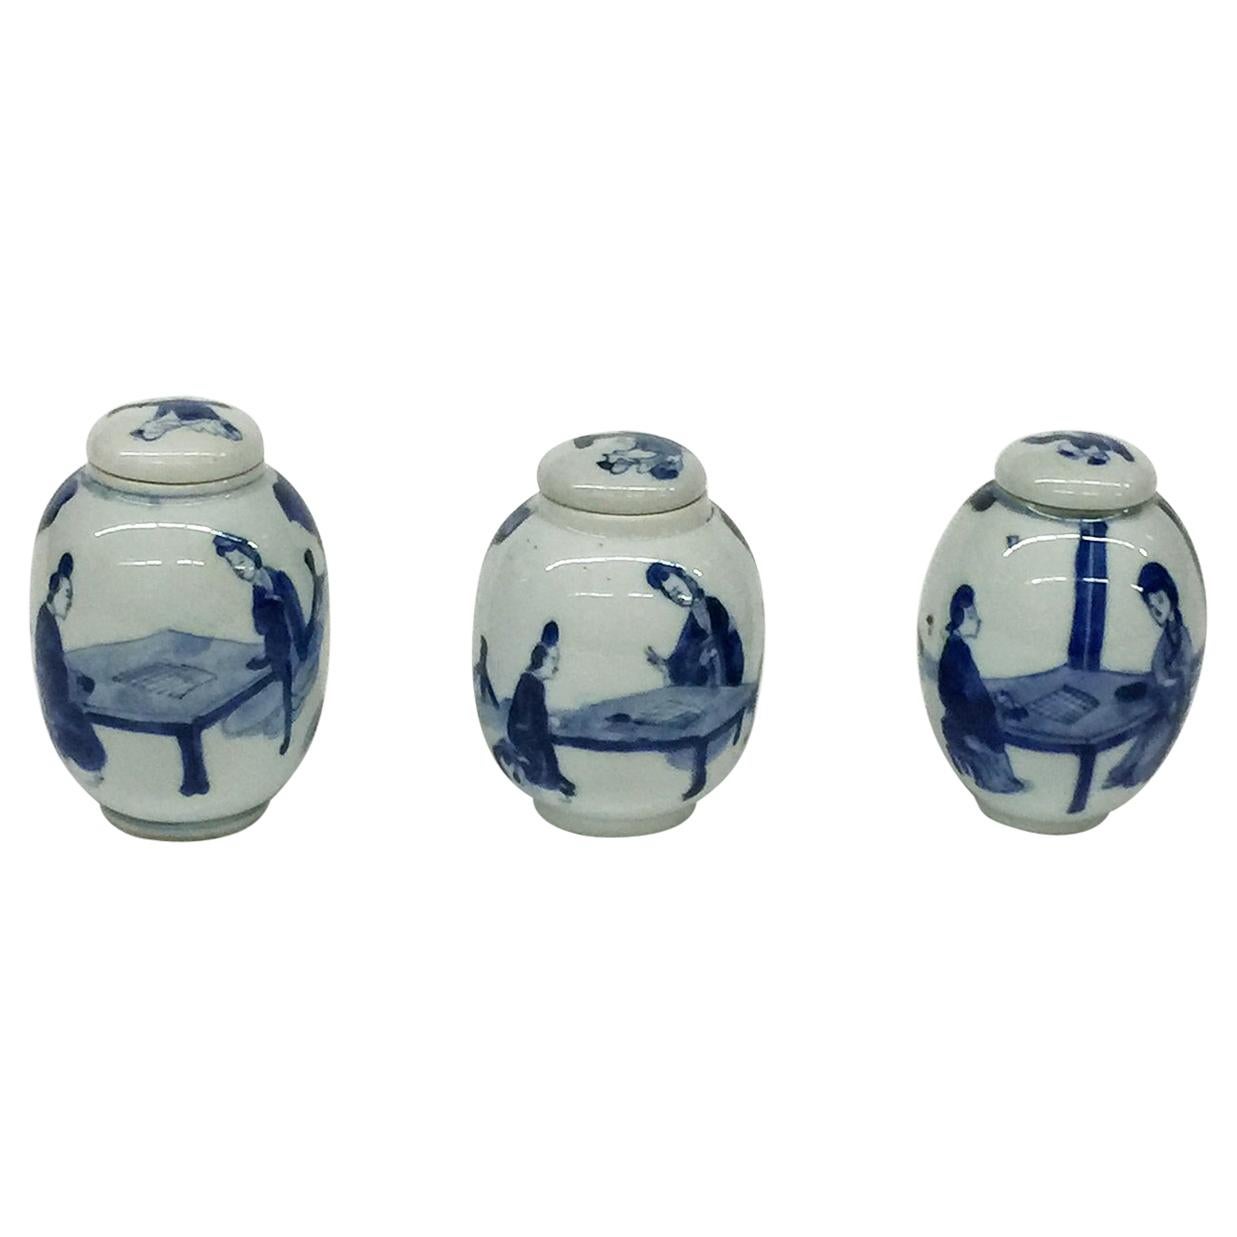 3 Small Chinese Porcelain Lidded Ginger Jars, 18th-19th Century